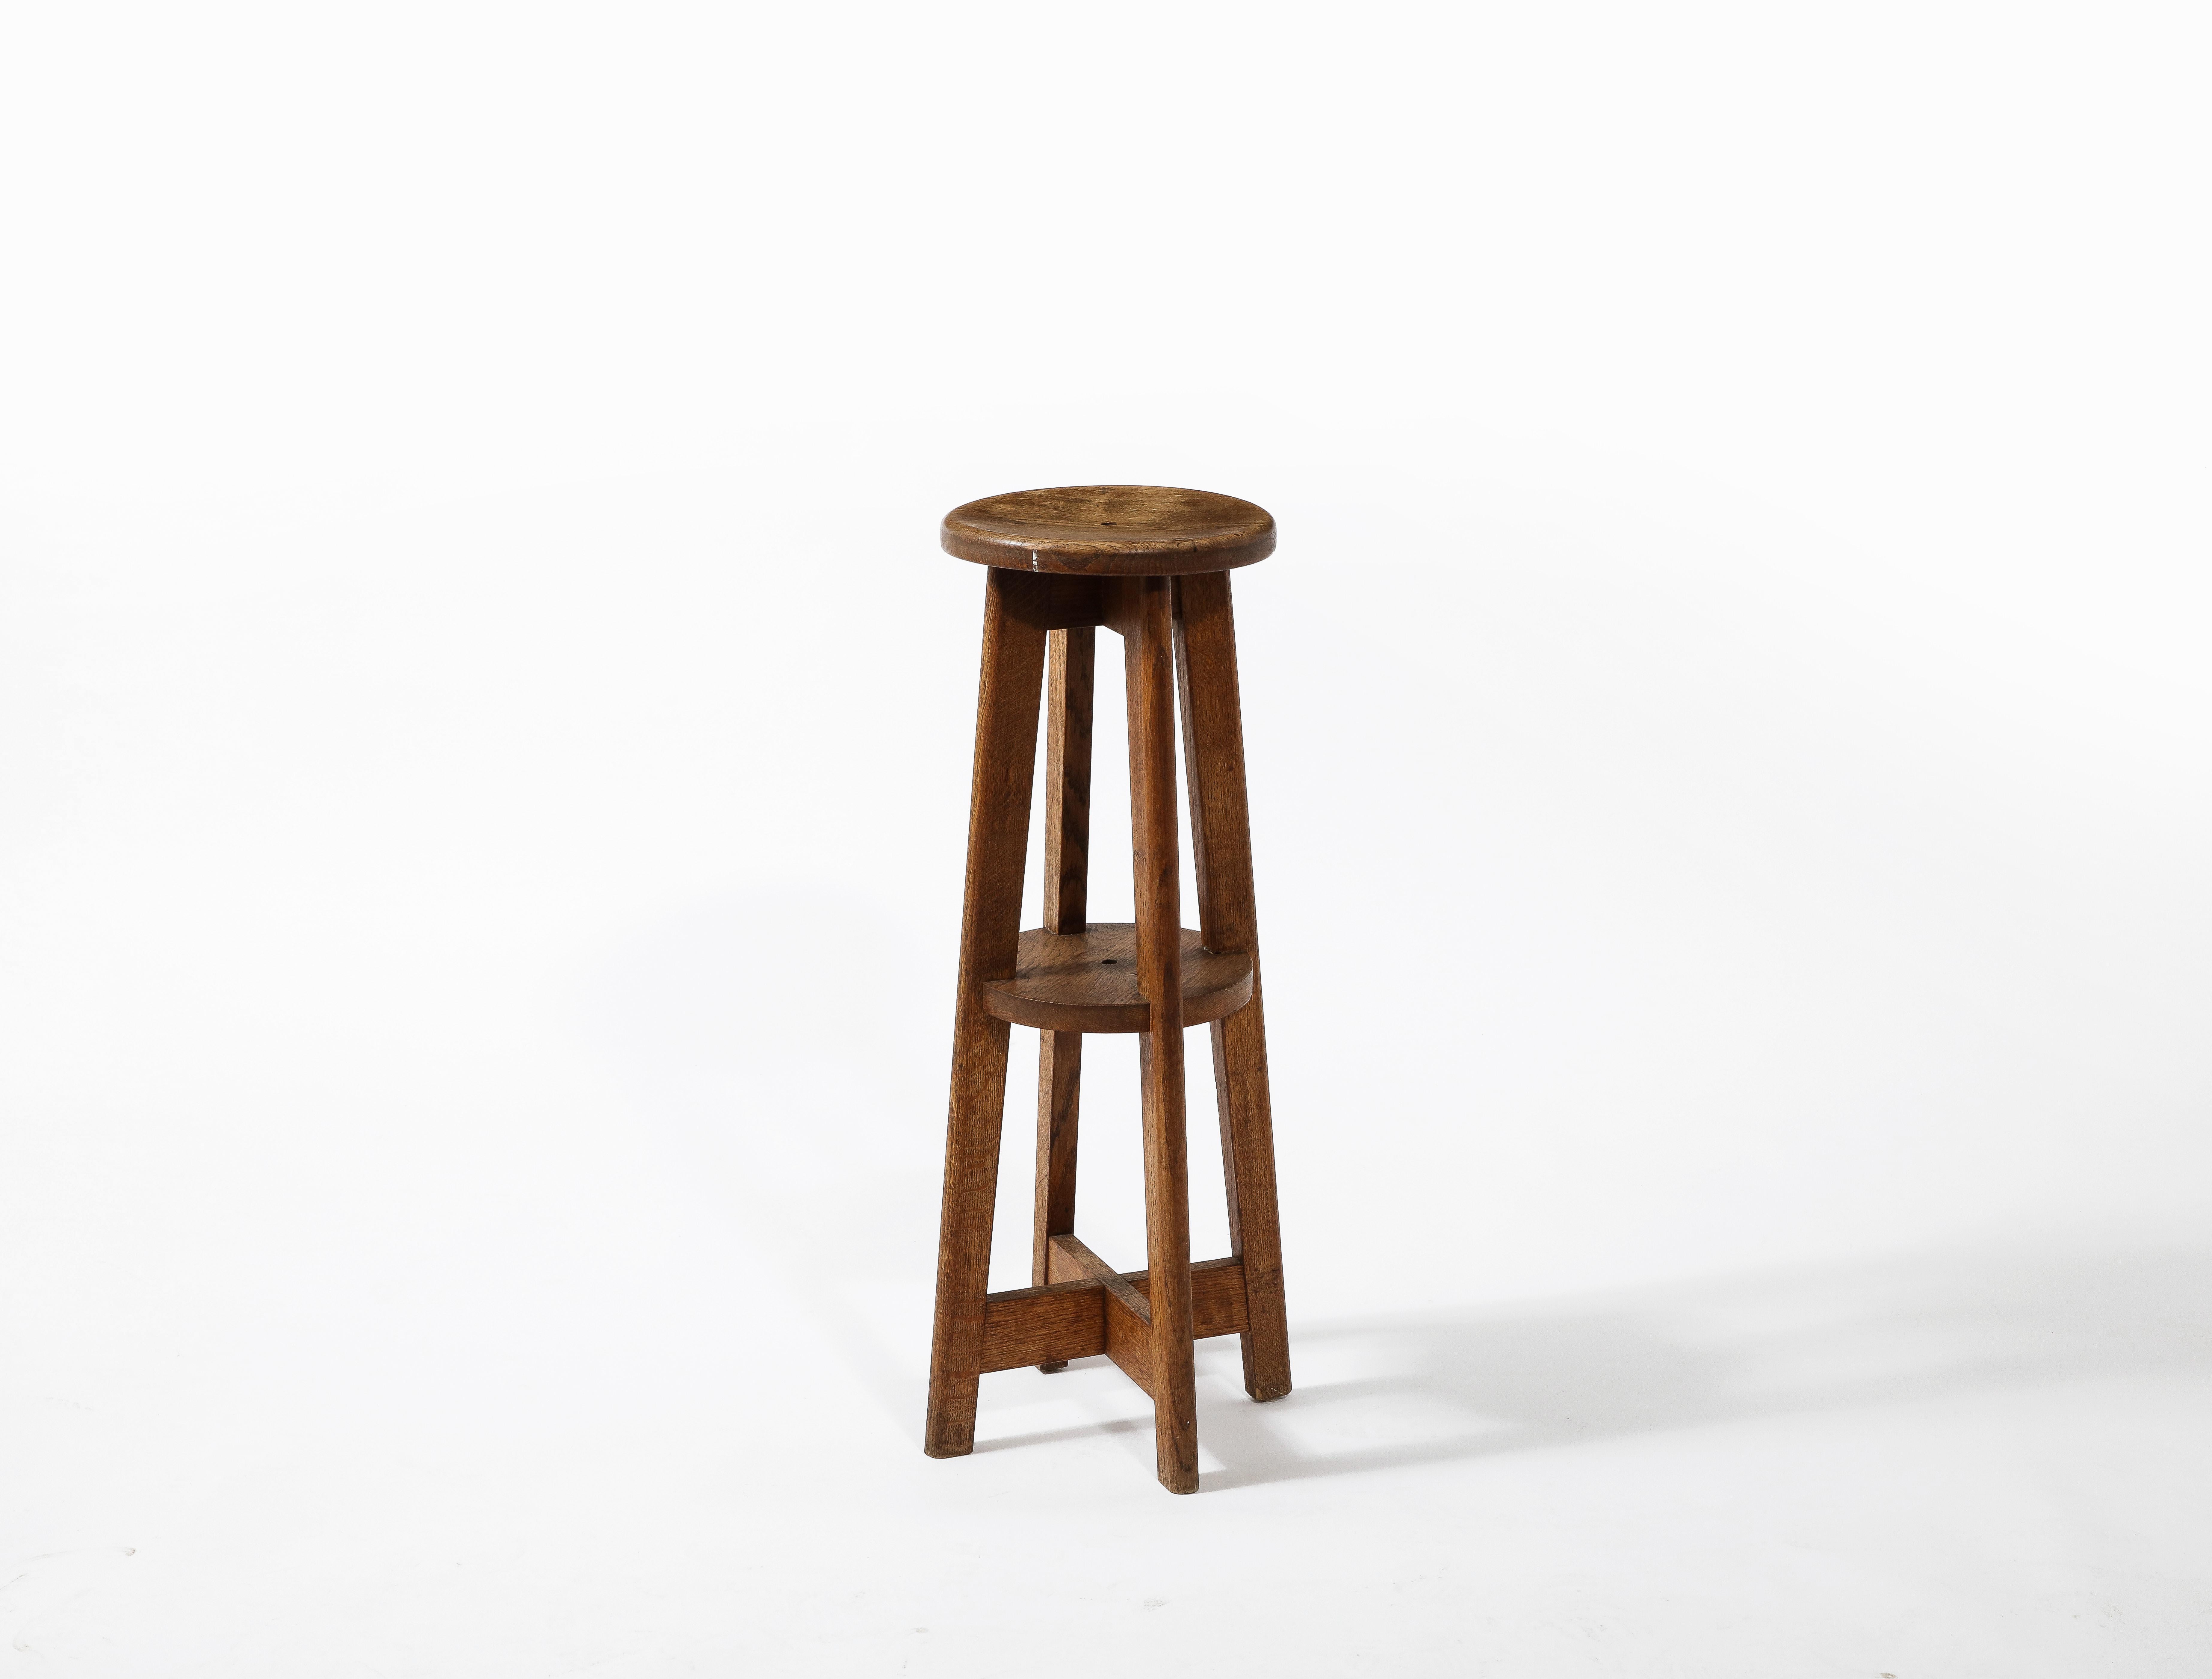 Tall Rustic Farm Stool or Pedestal in Solid Oak, France 1950's For Sale 2